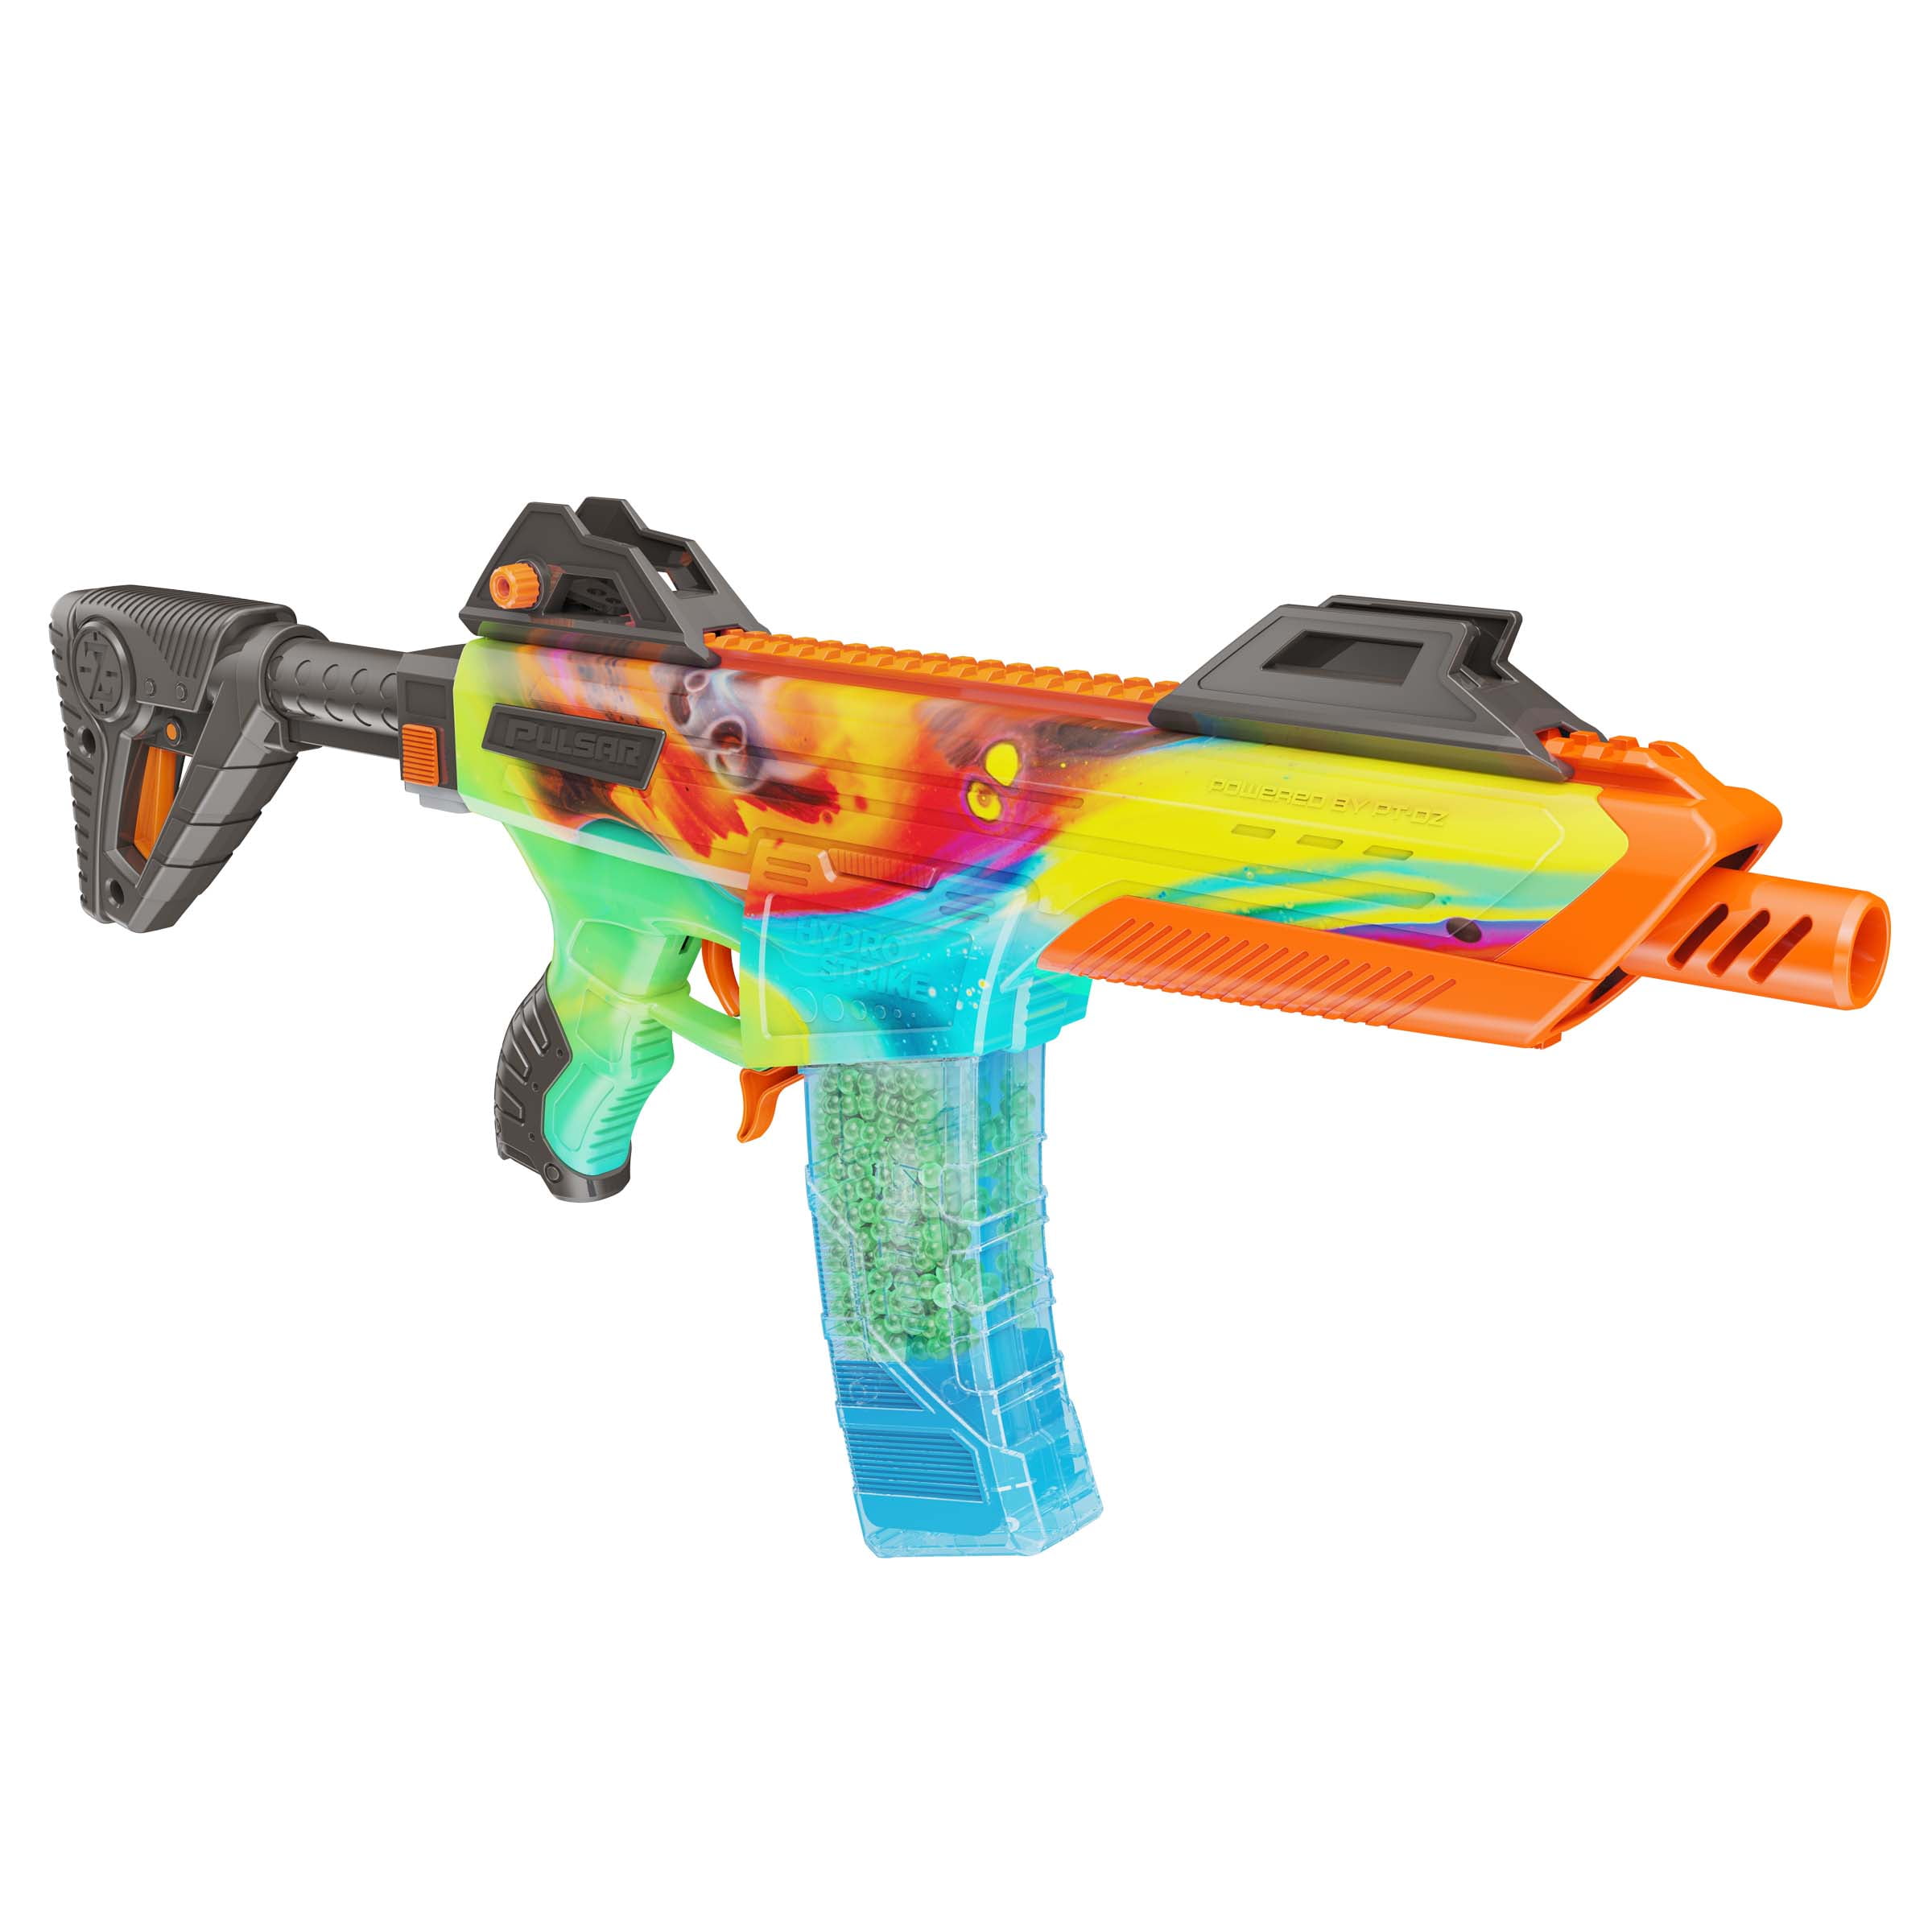 Hydro Strike Pulsar Pro Battery Gel Bead Blaster Outdoor Toy with 5000 ...